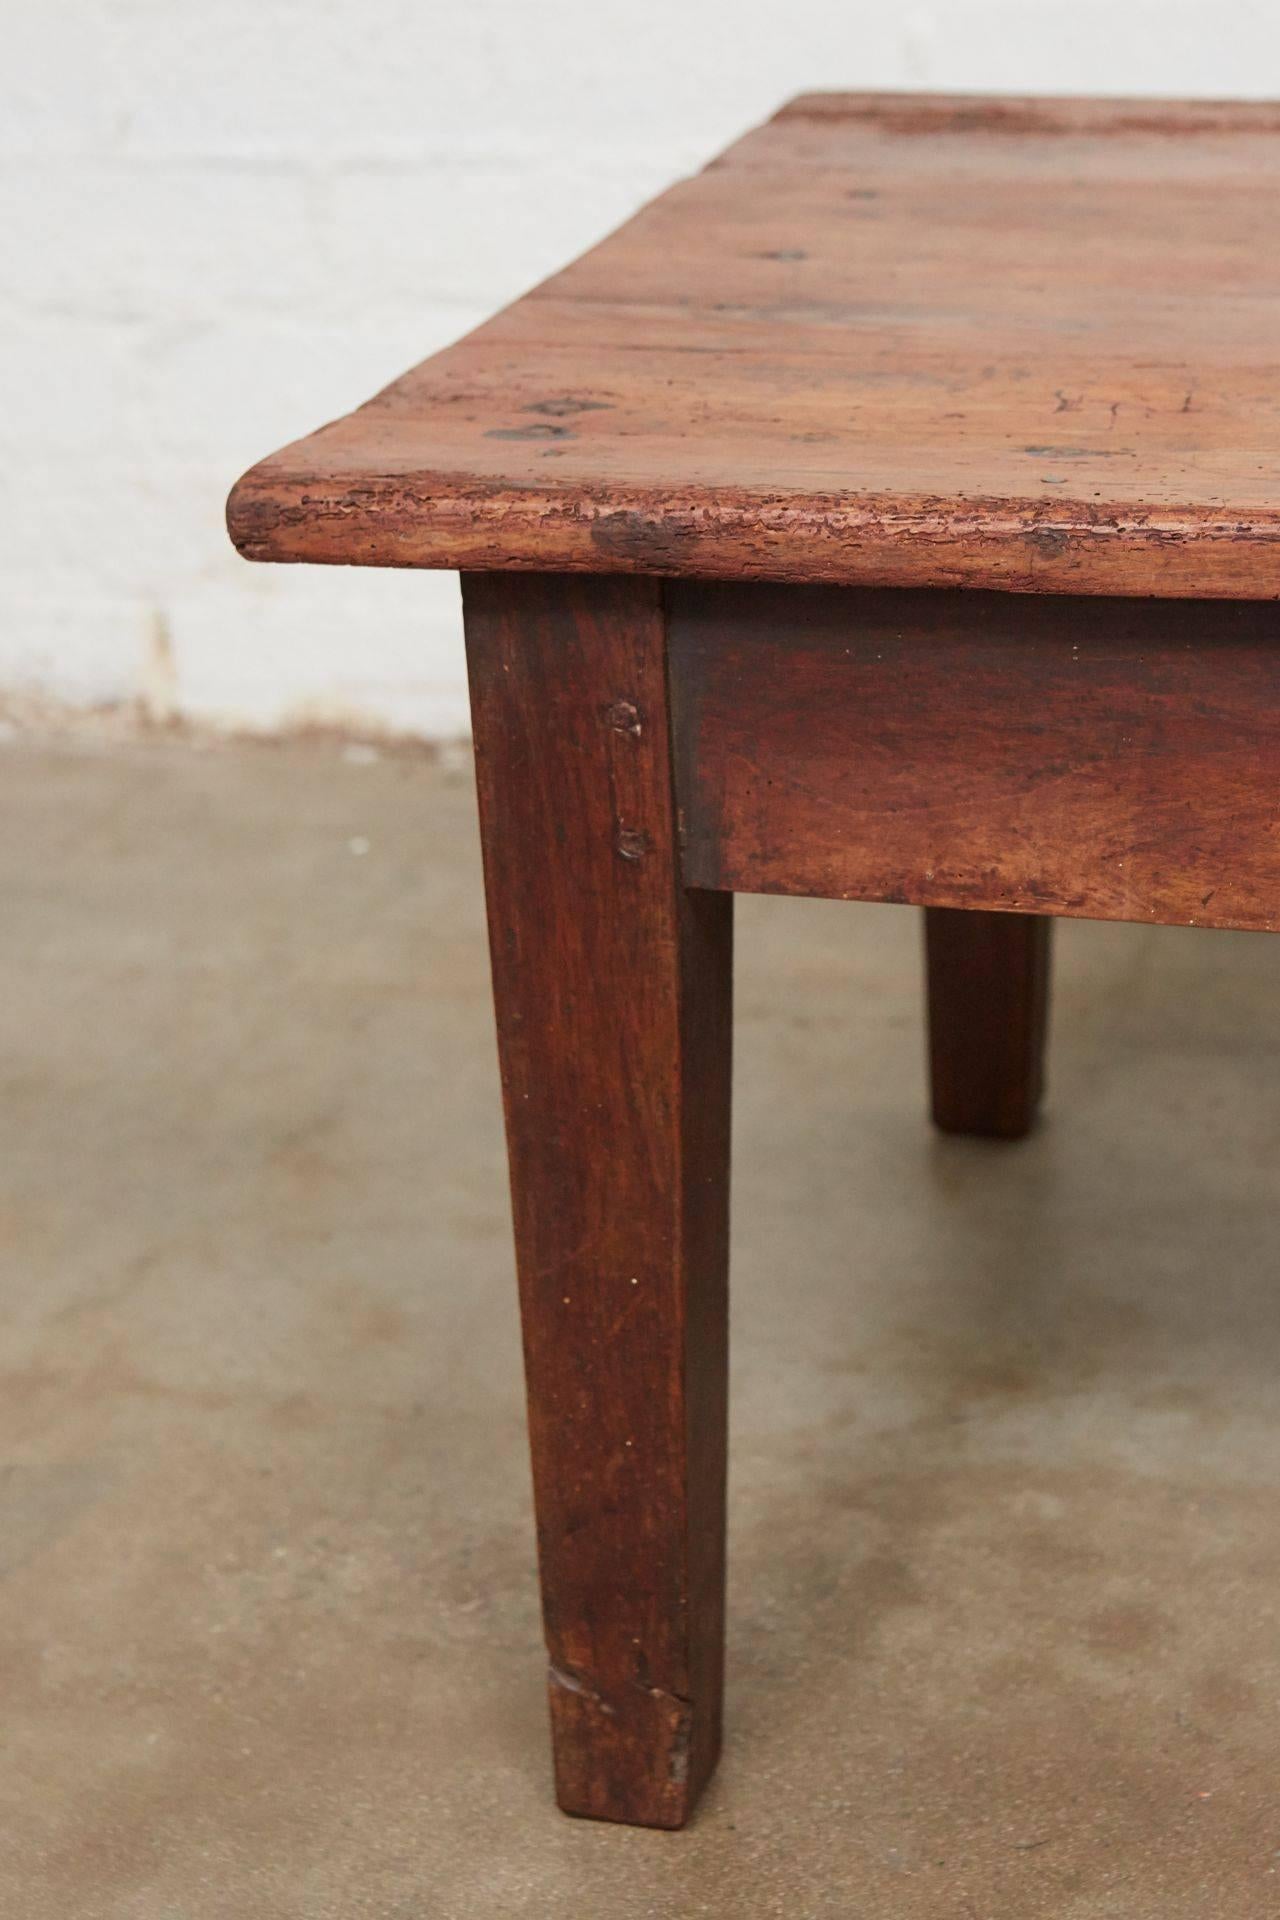 This table is of a good size and a wonderful color. The table has two small drawers on each side. Signs of age and wear indicate that this table is a very special piece of 19th century French country furniture.